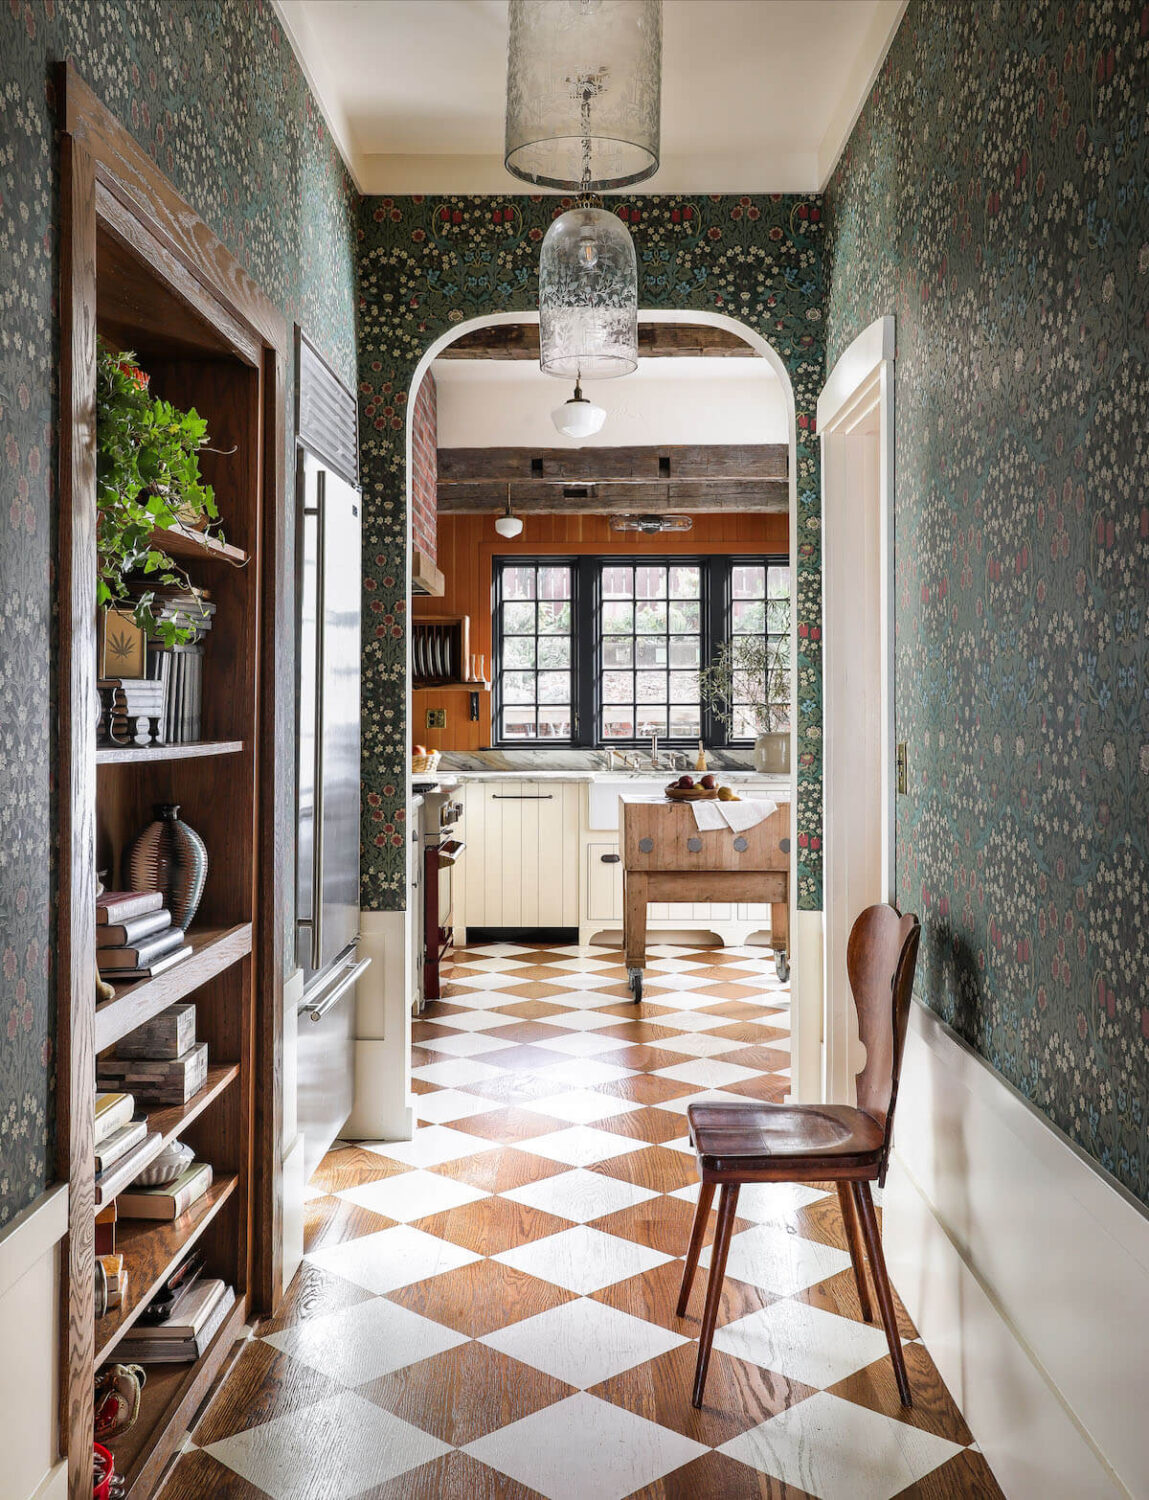 kitchen-wallpaper-built-in-shelves-checkerboard-floor-english-country-style-nordroom